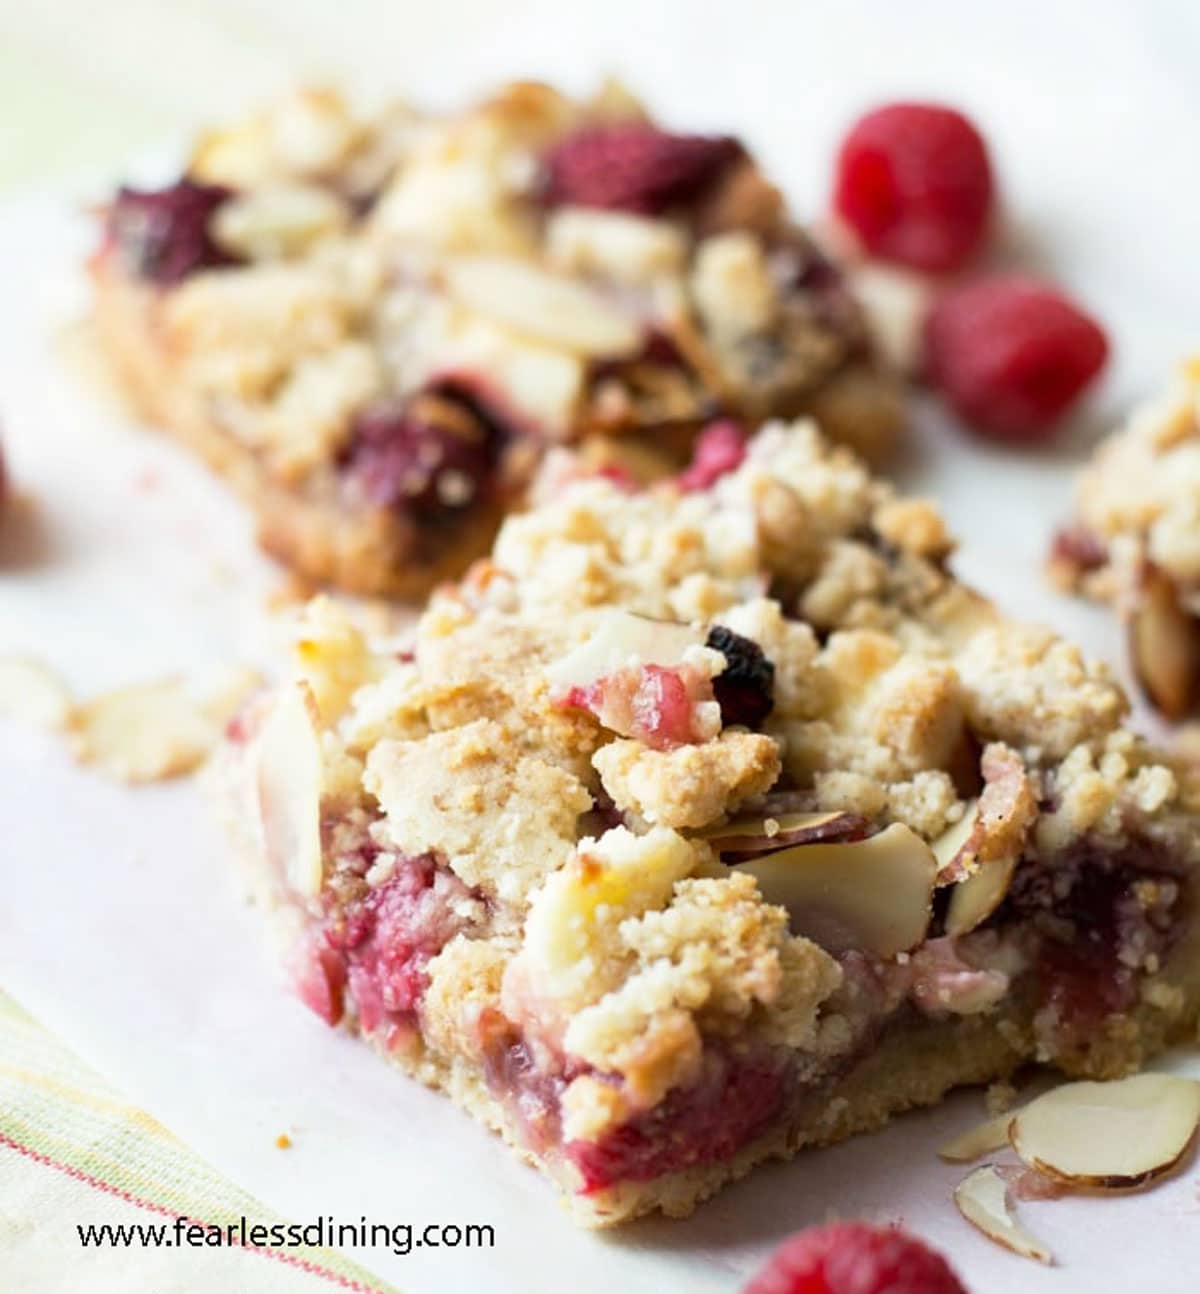 A close up of the raspberry bars.